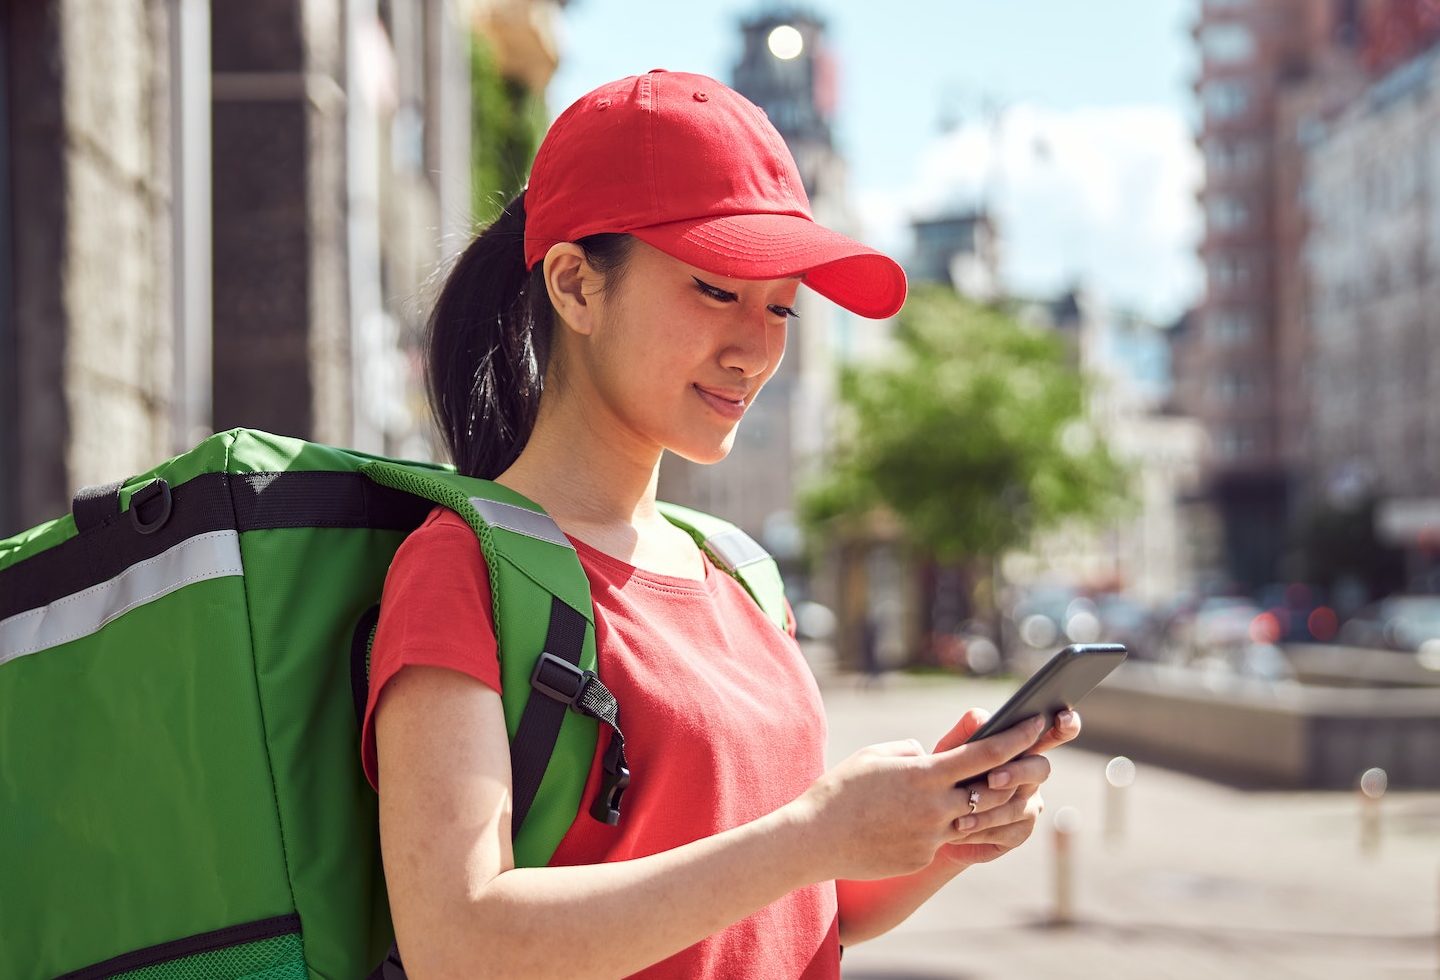 Asian student delivering food through city using mobile phone